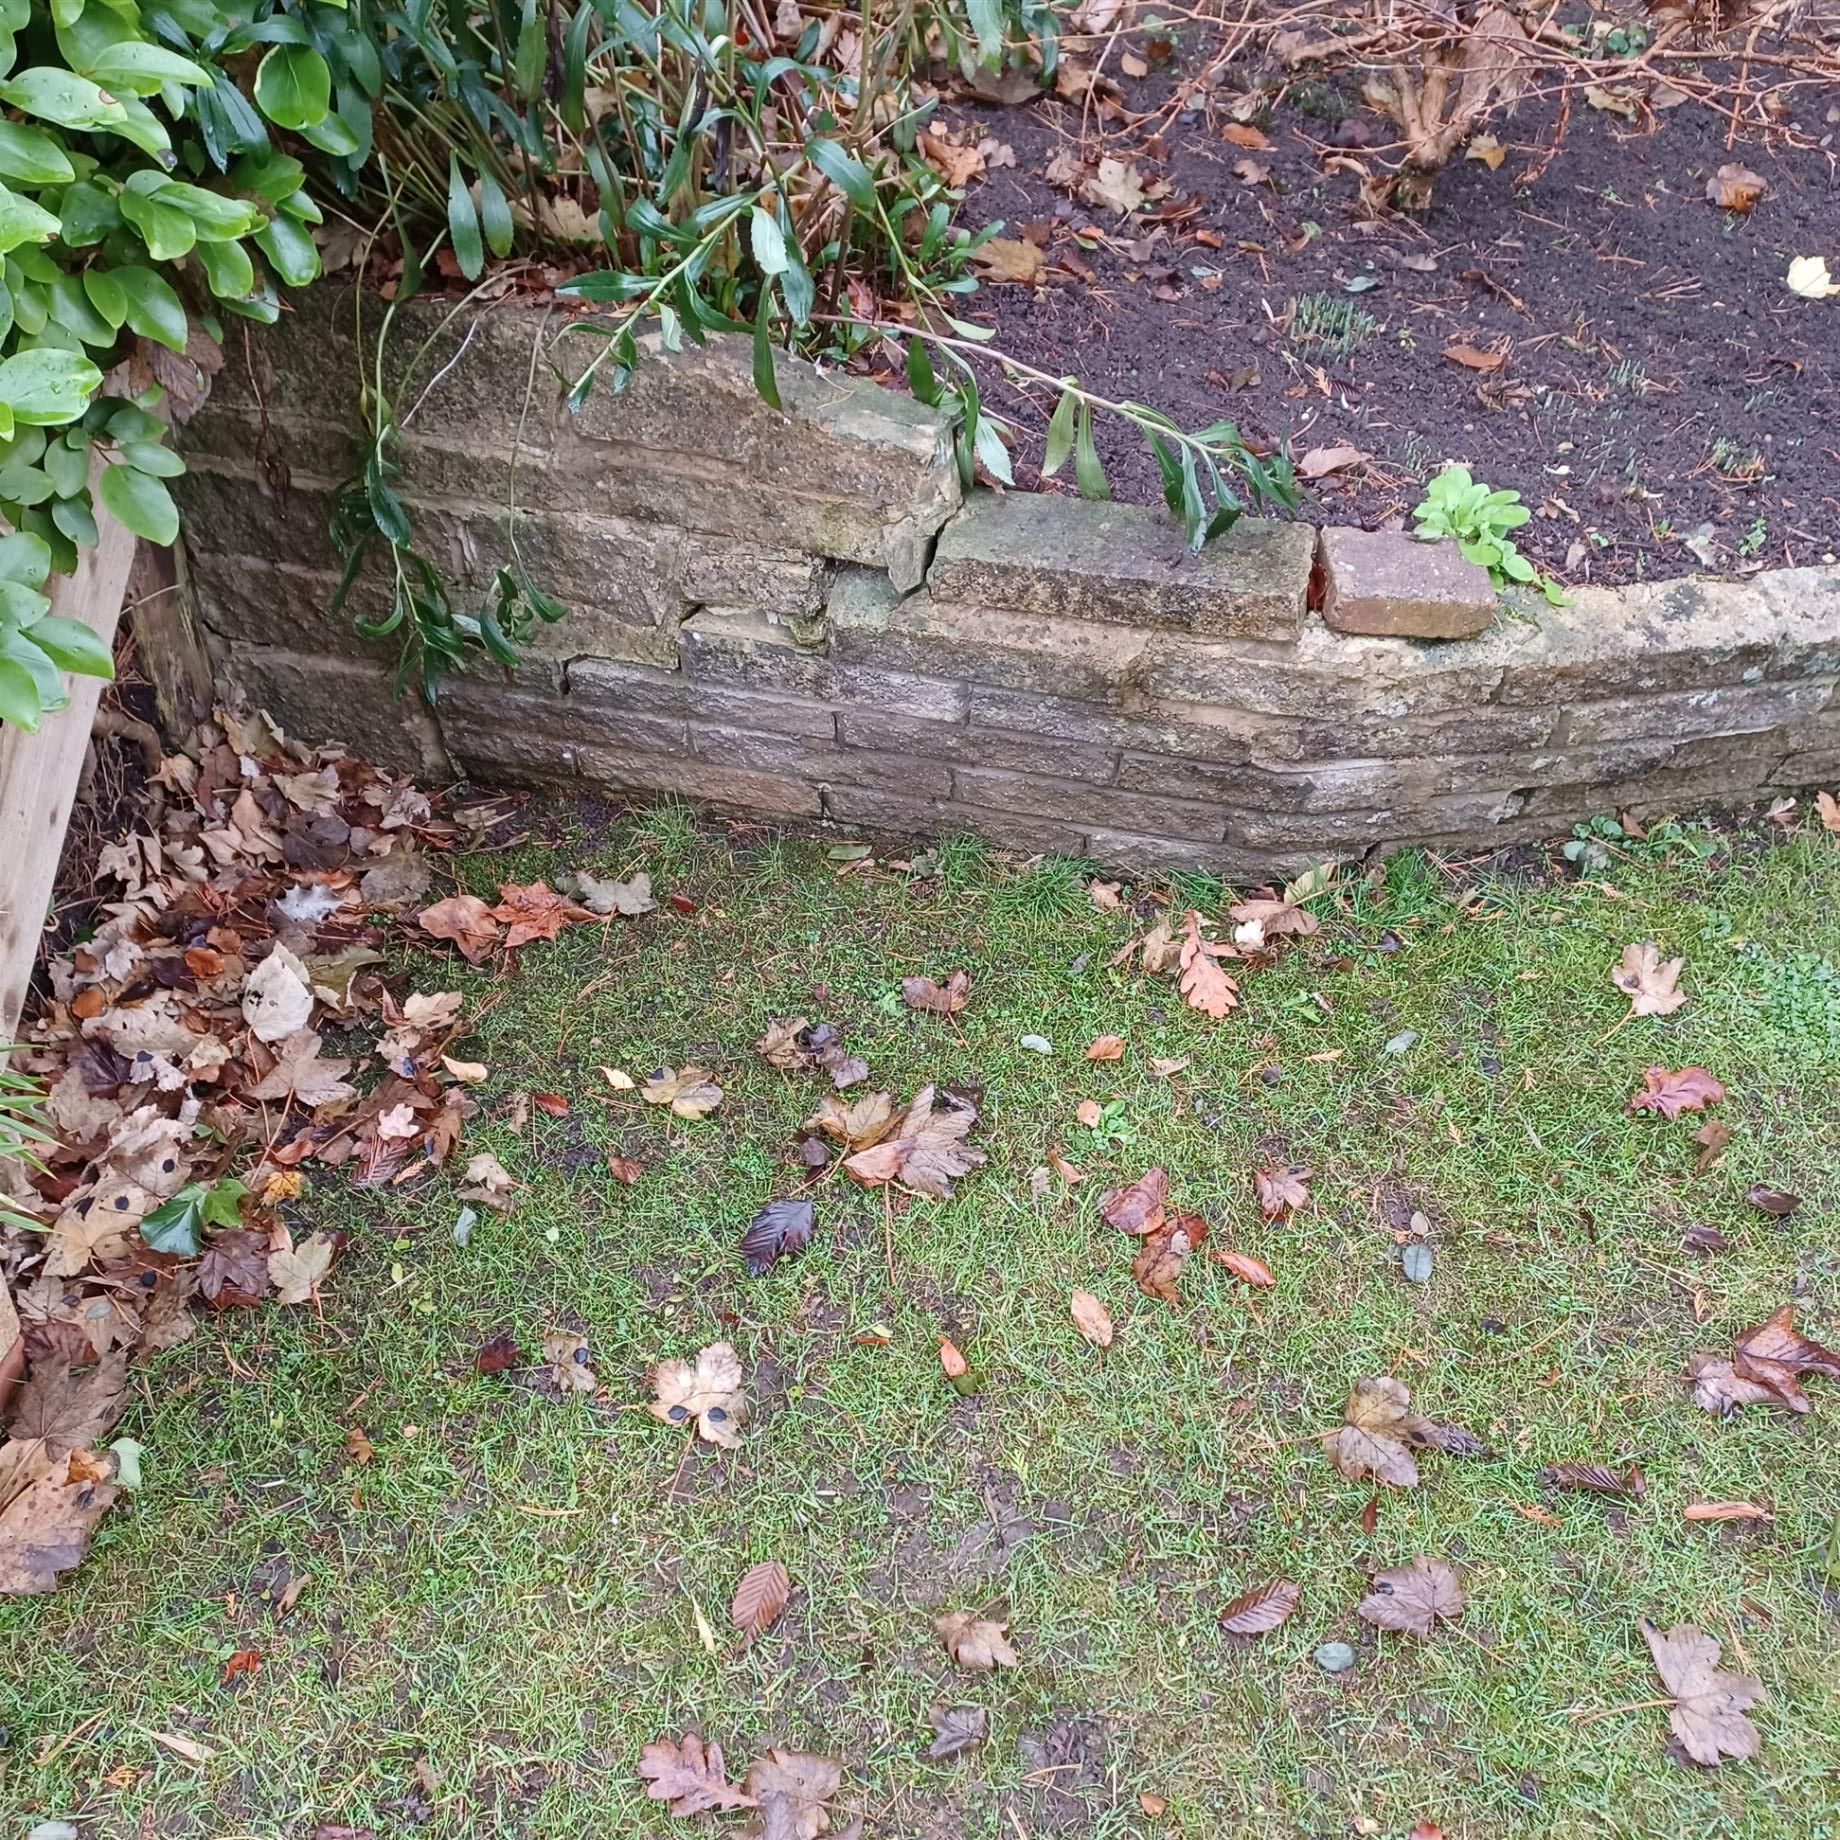 Garden retaining wall under stess and showing signs of movement.